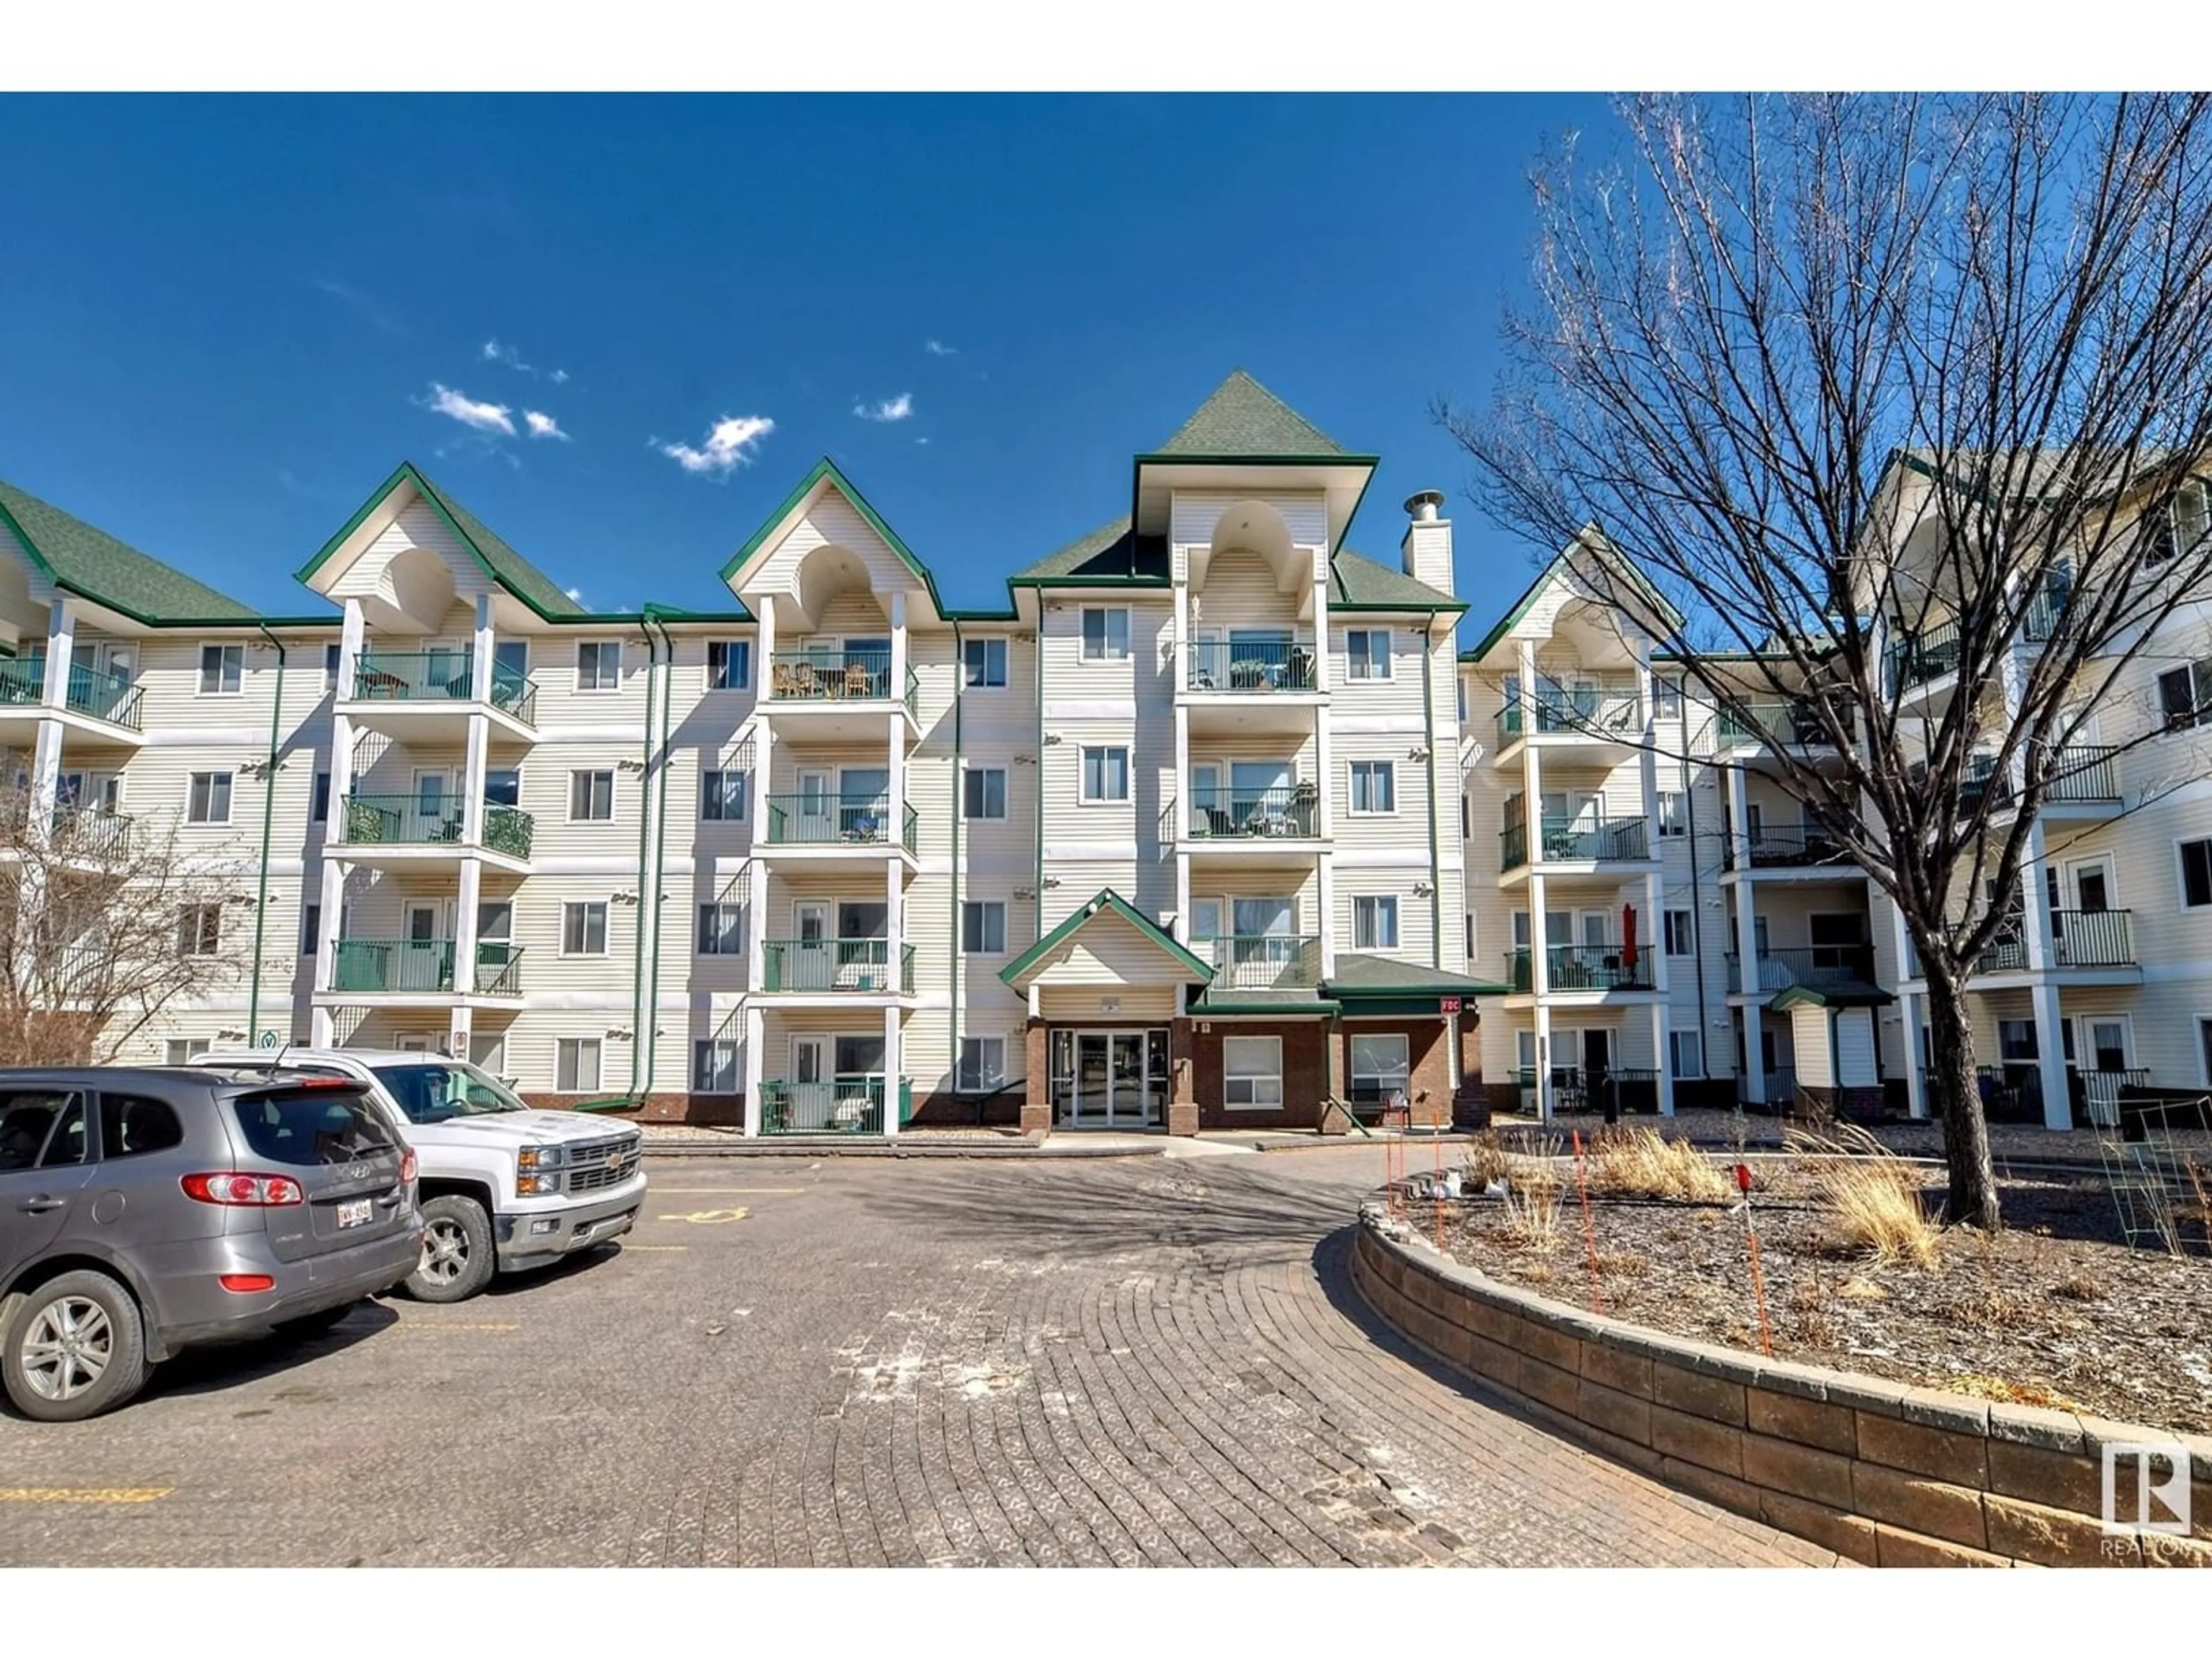 A pic from exterior of the house or condo for #416 13625 34 ST NW, Edmonton Alberta T5A0E3